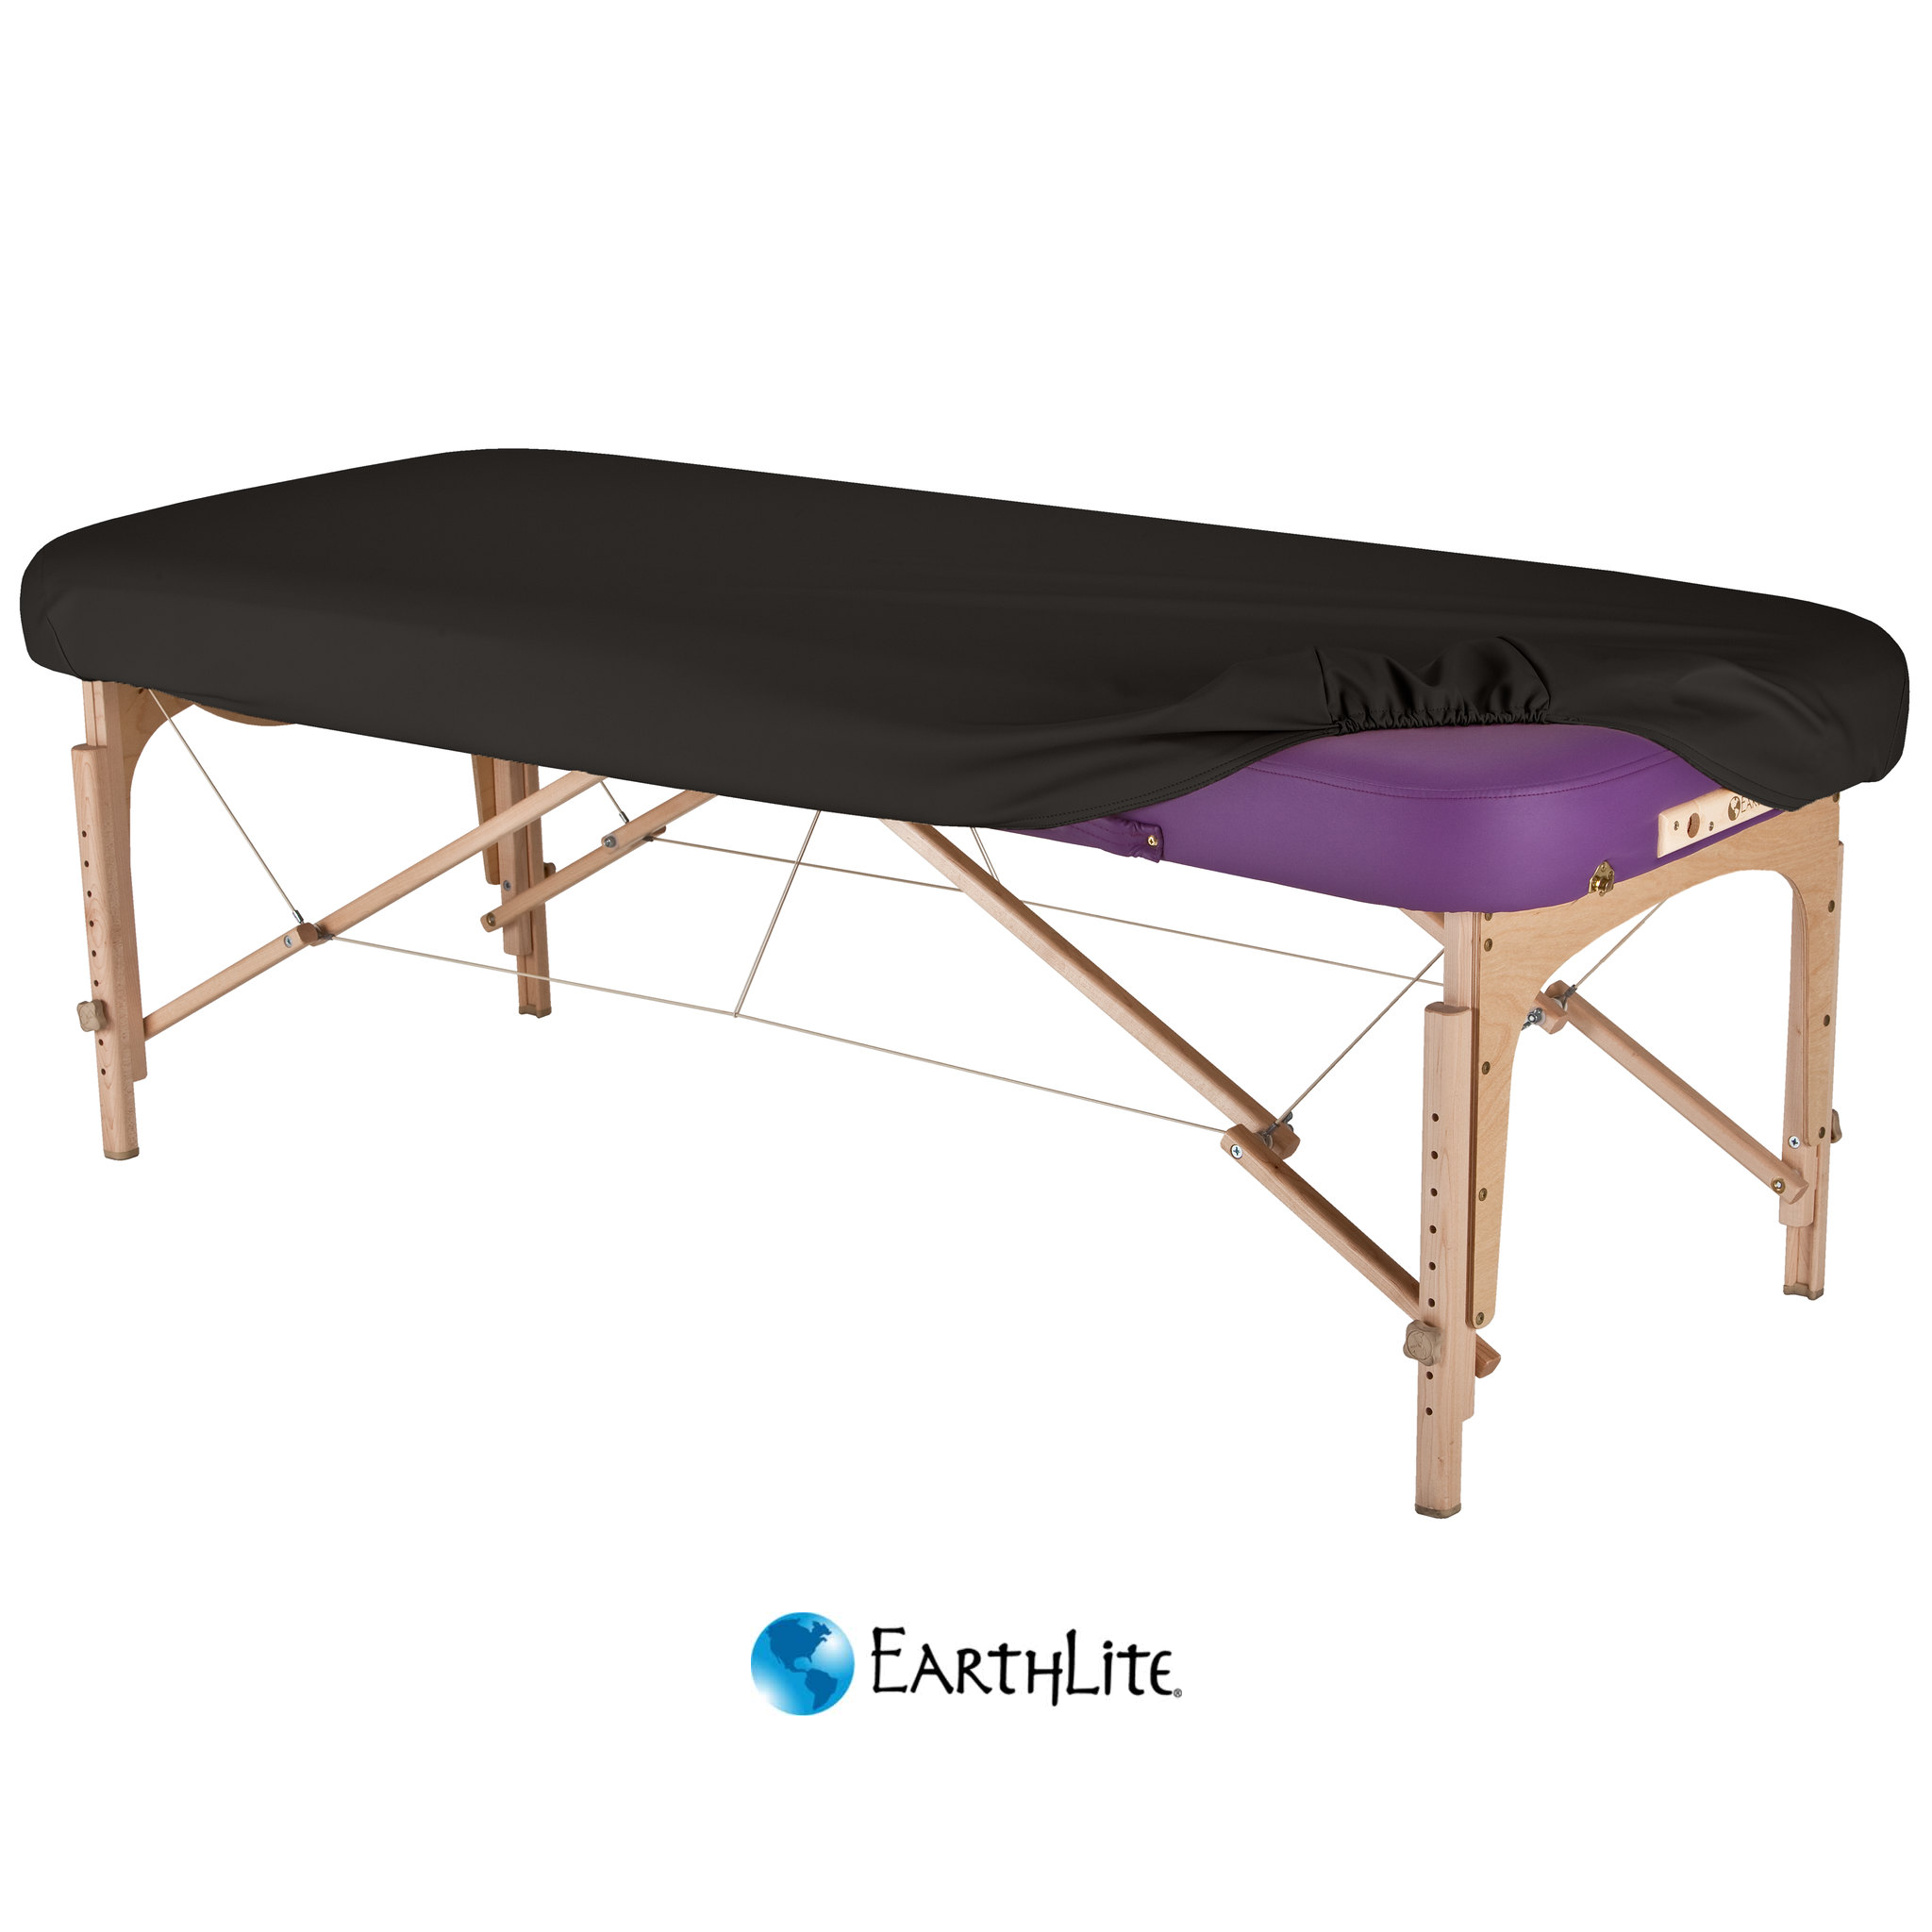 EarthLite Table Cover